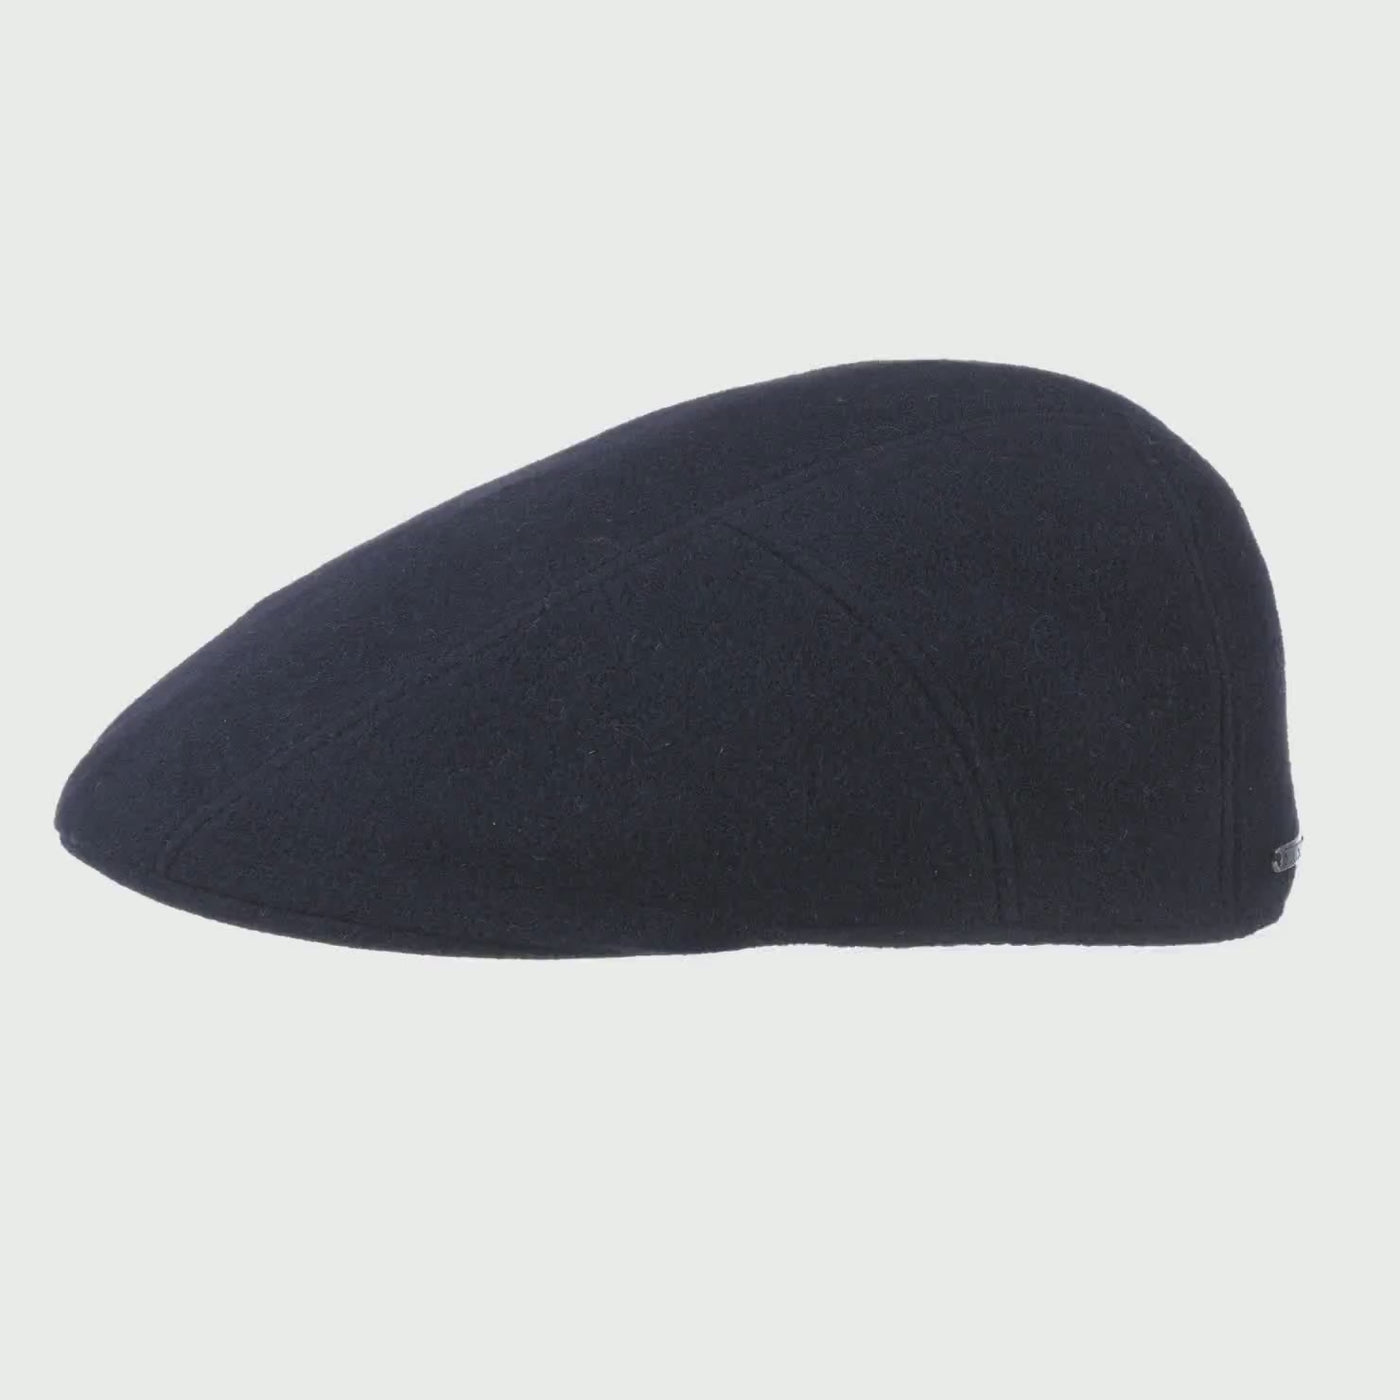 Stetson Ivy Cap Wool Cashmere - Navy Sixpence